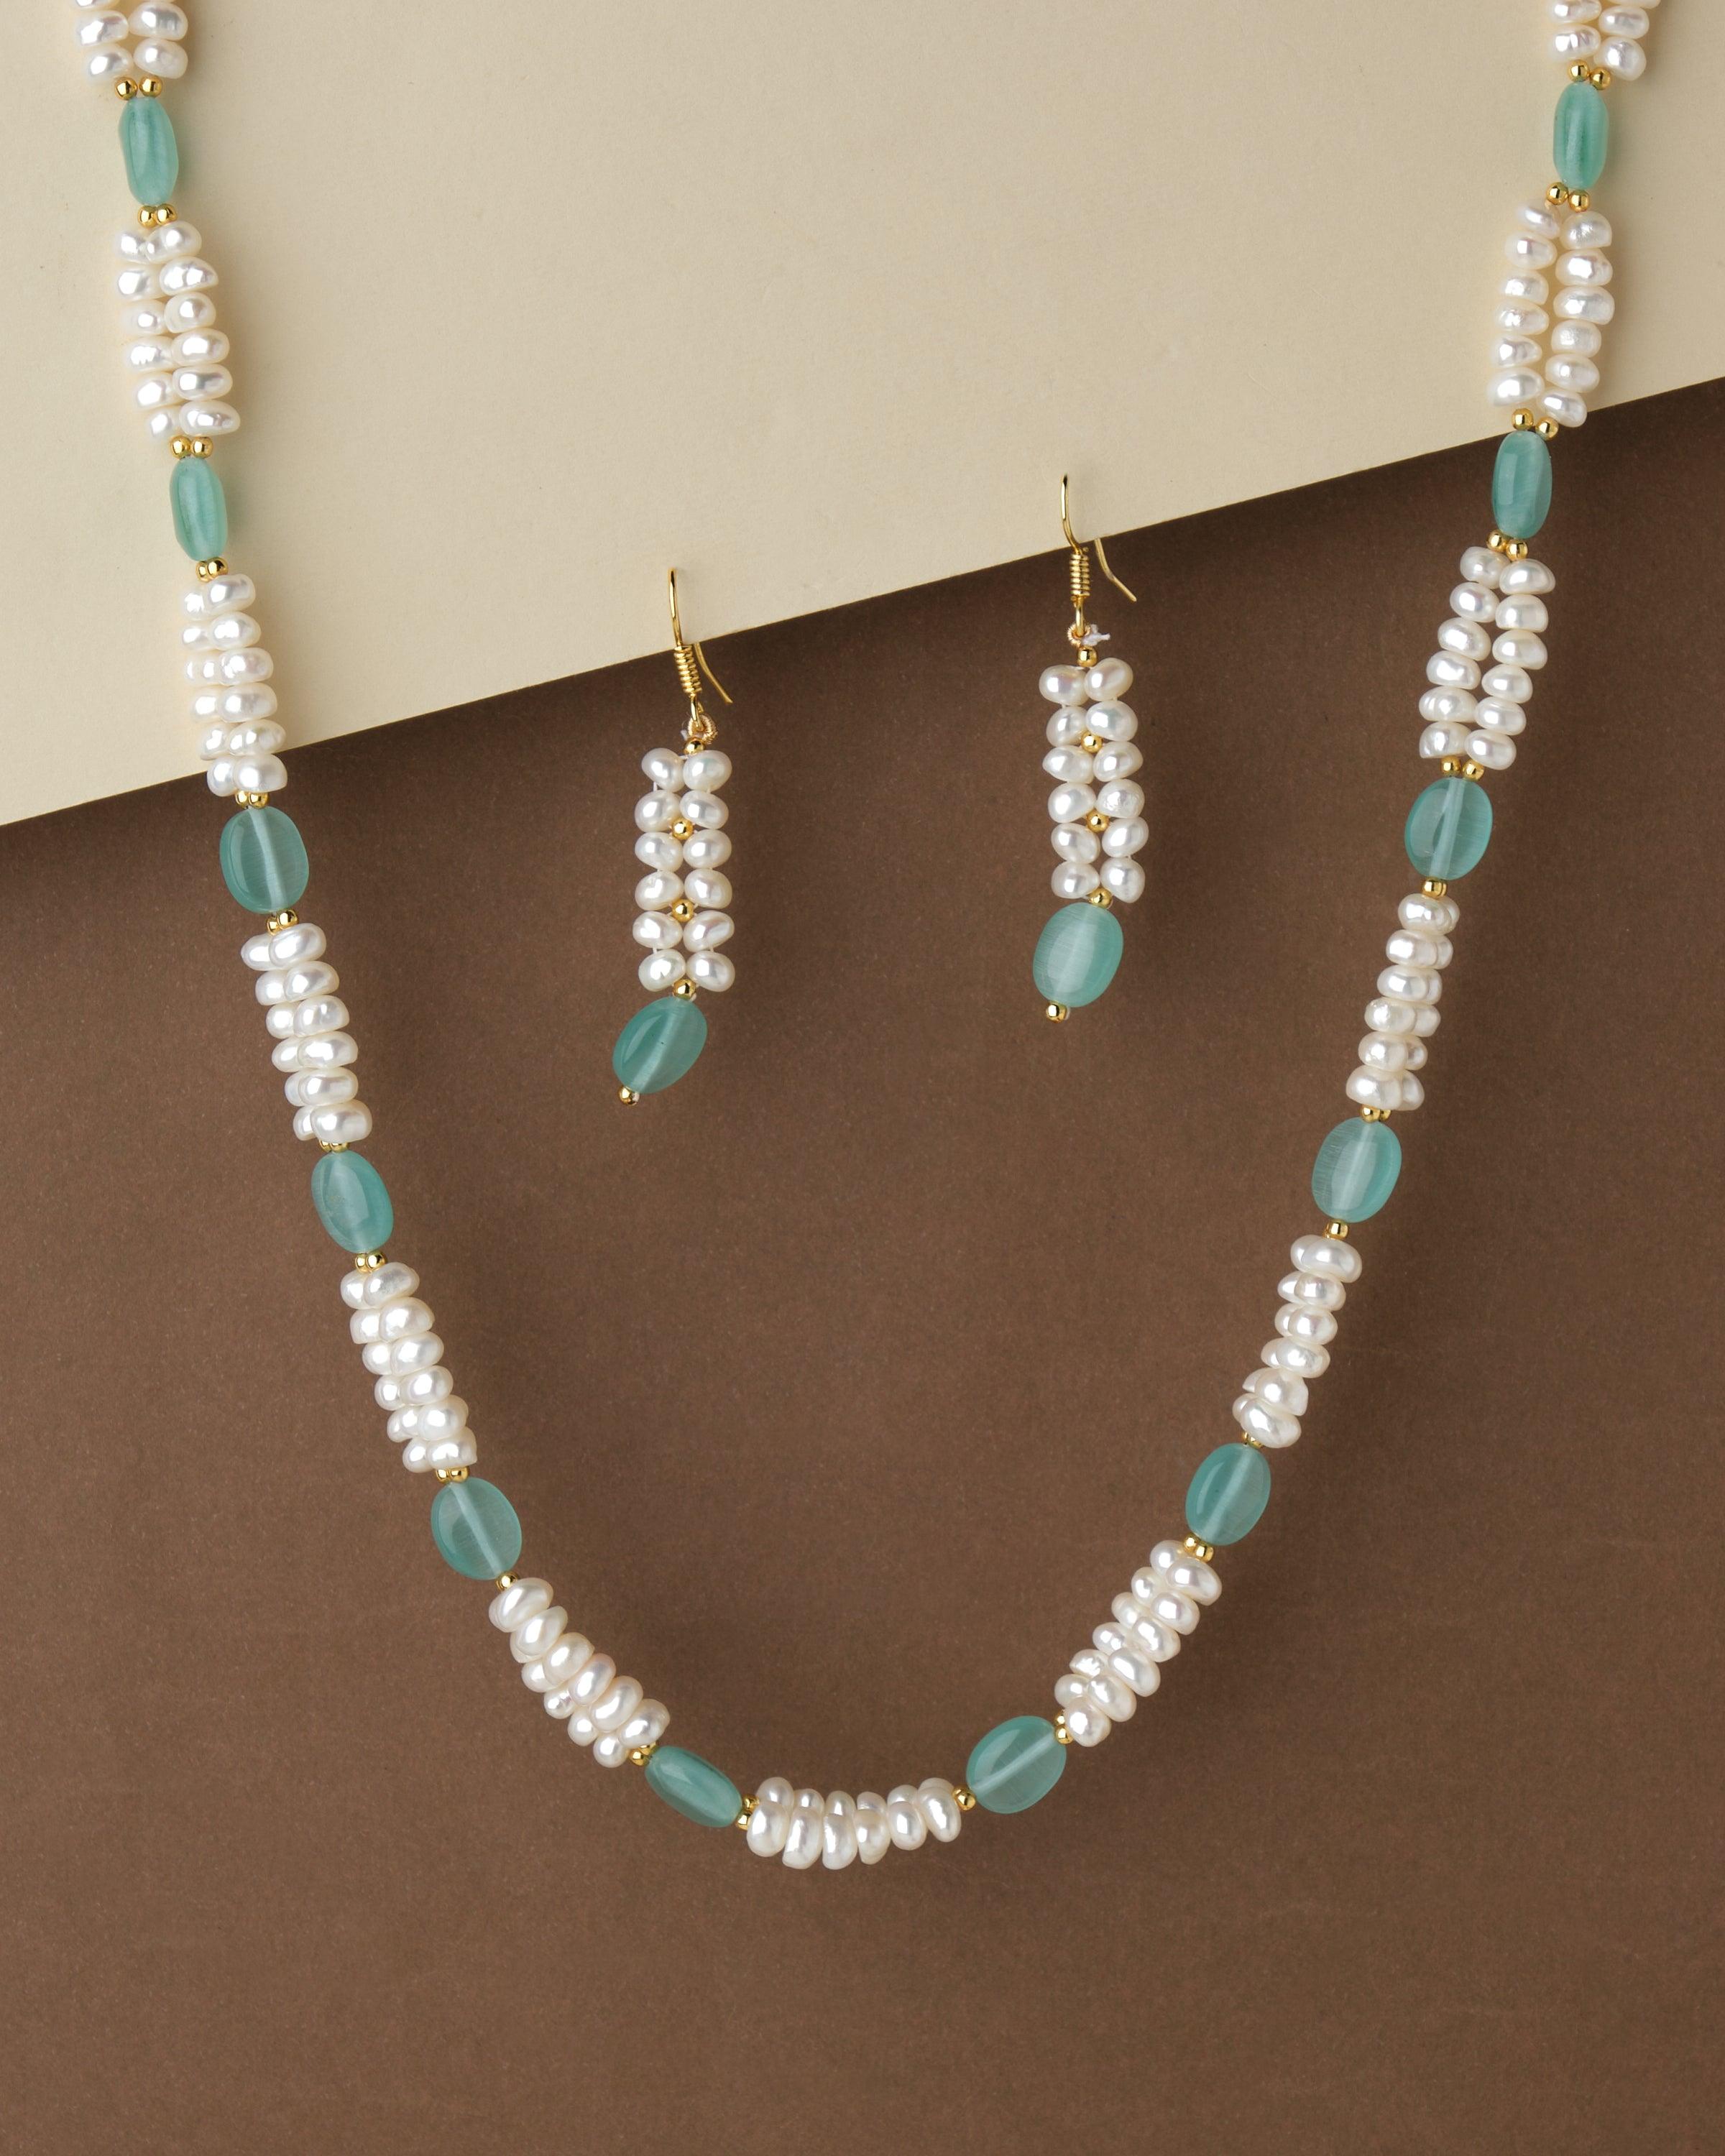 Multicolored Pearl and Turquoise Necklace – Sheila Fajl